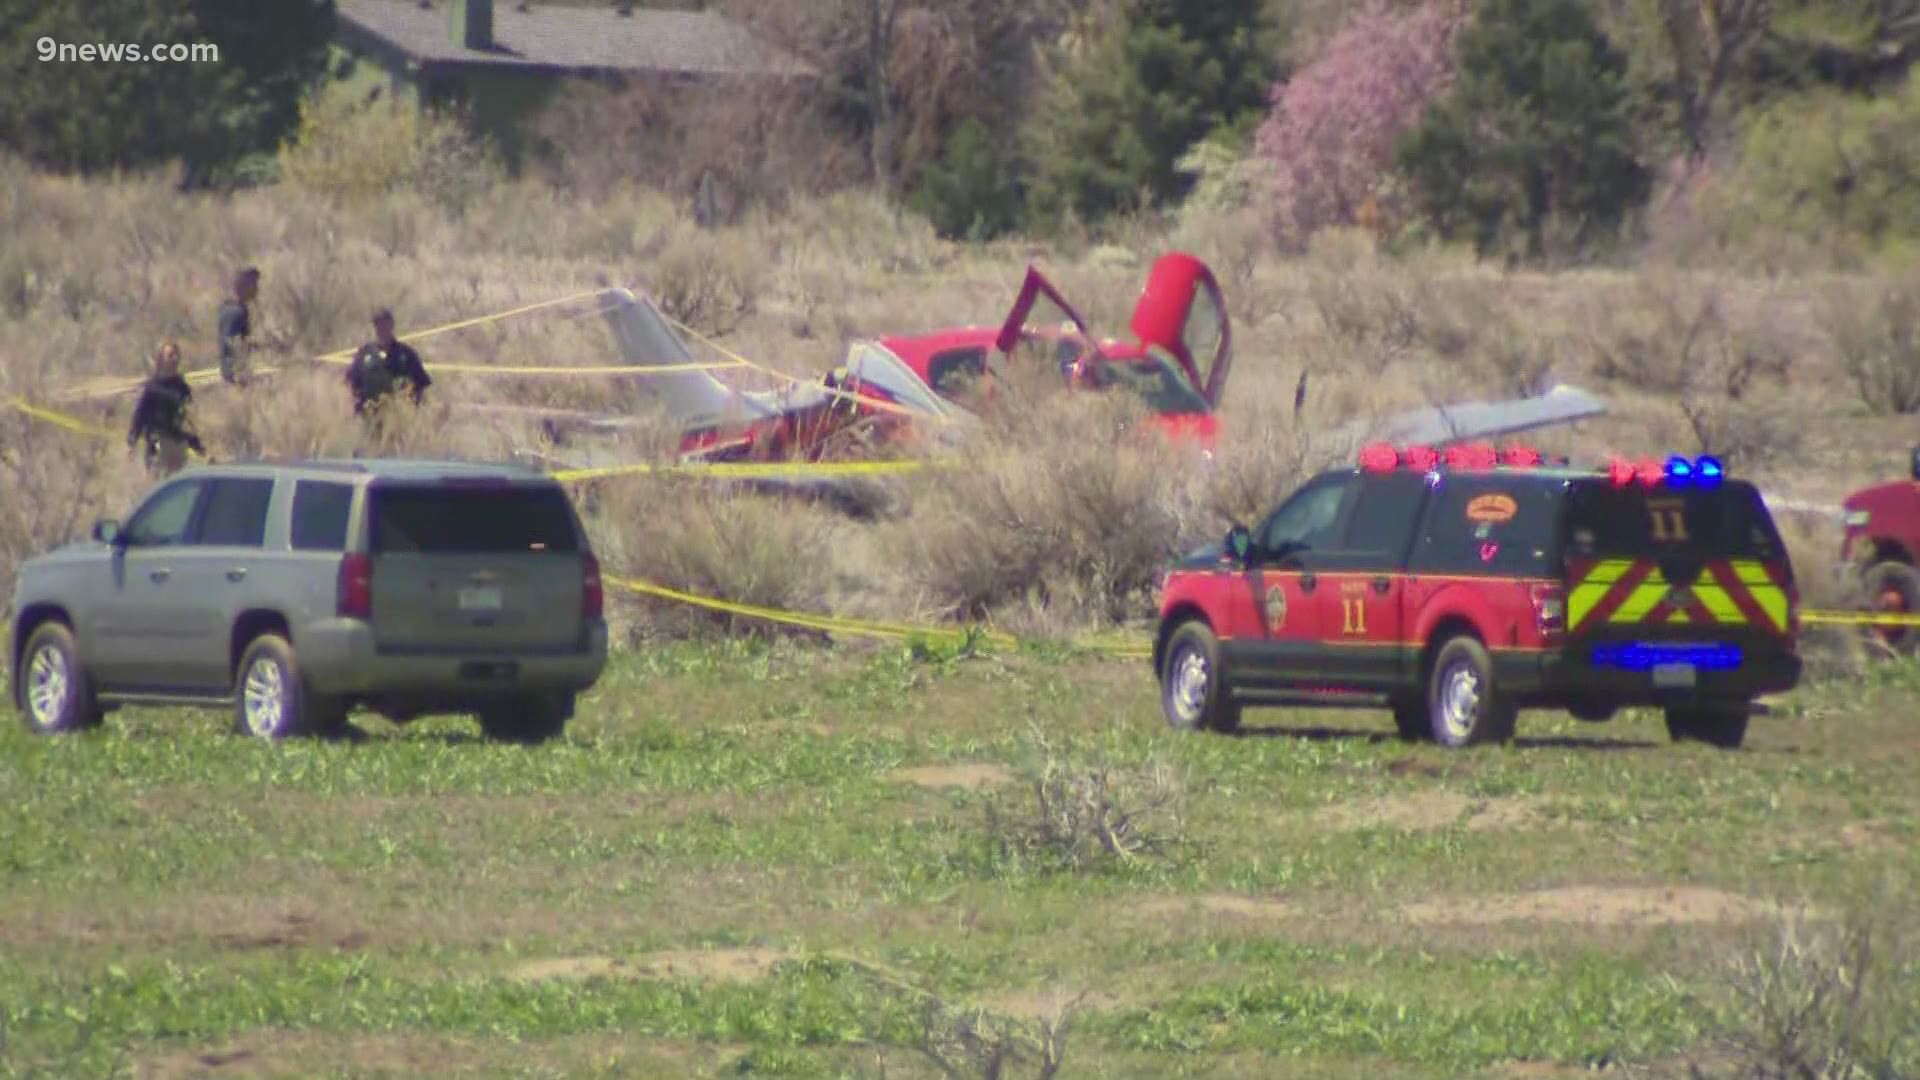 One plane crashed south of Cherry Creek Reservoir, and the other plane was able to land safely, according to South Metro Fire Rescue.